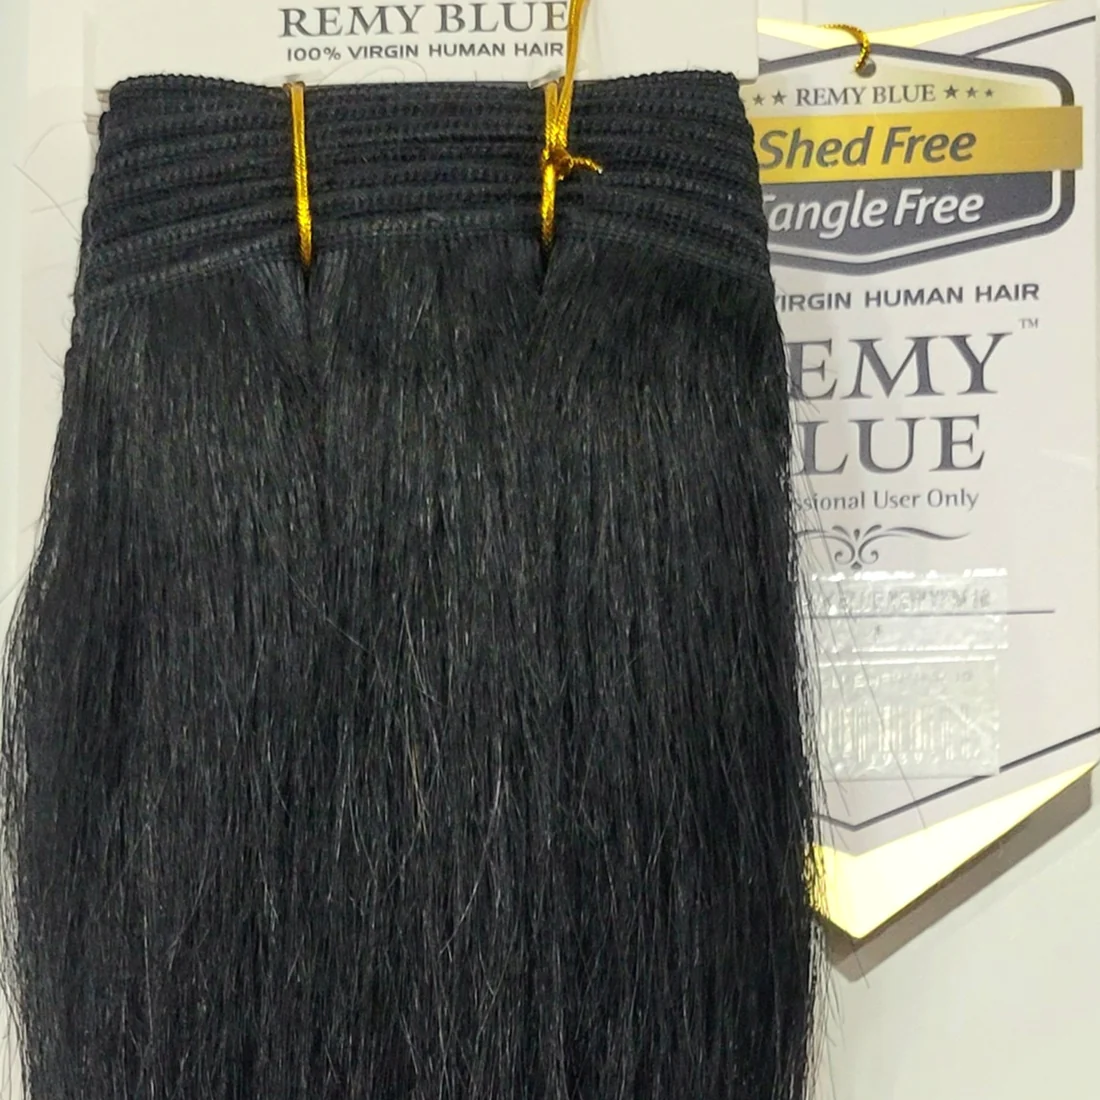 Remy Blue Human Hair New Yaky 24"